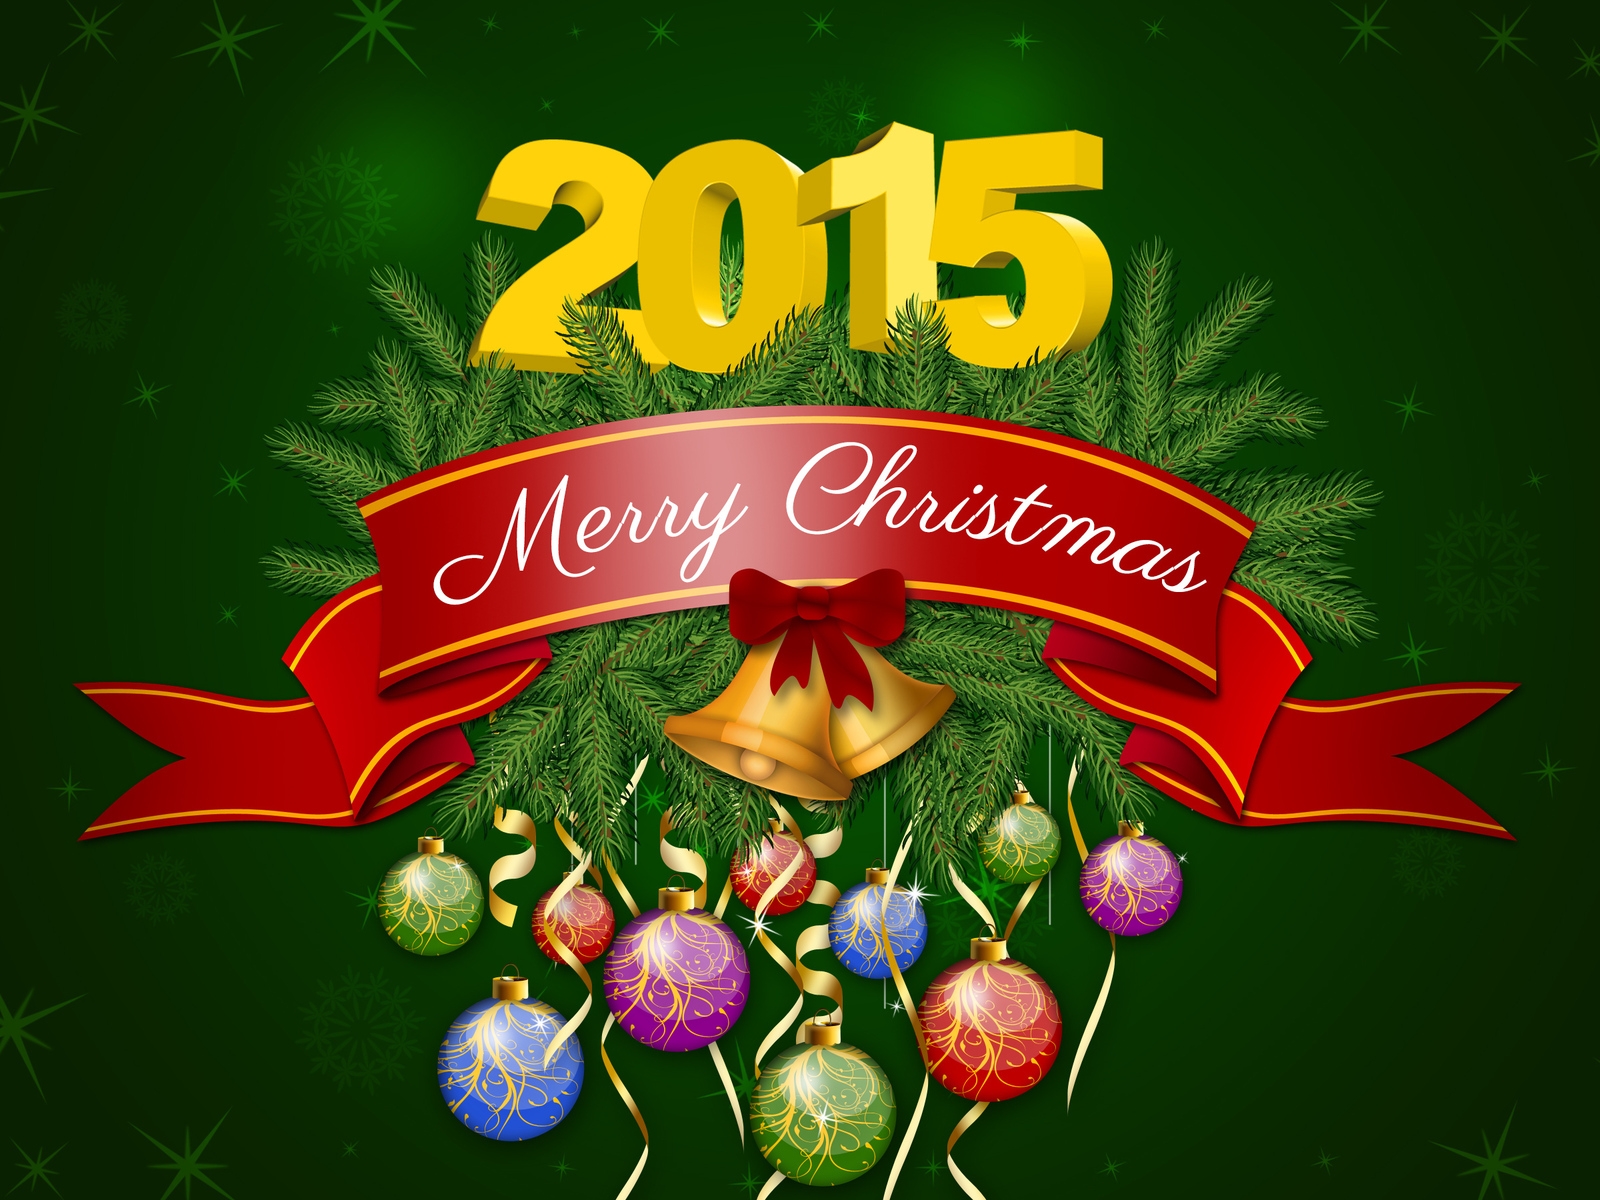 2014 Merry Christmas Poster for 1600 x 1200 resolution